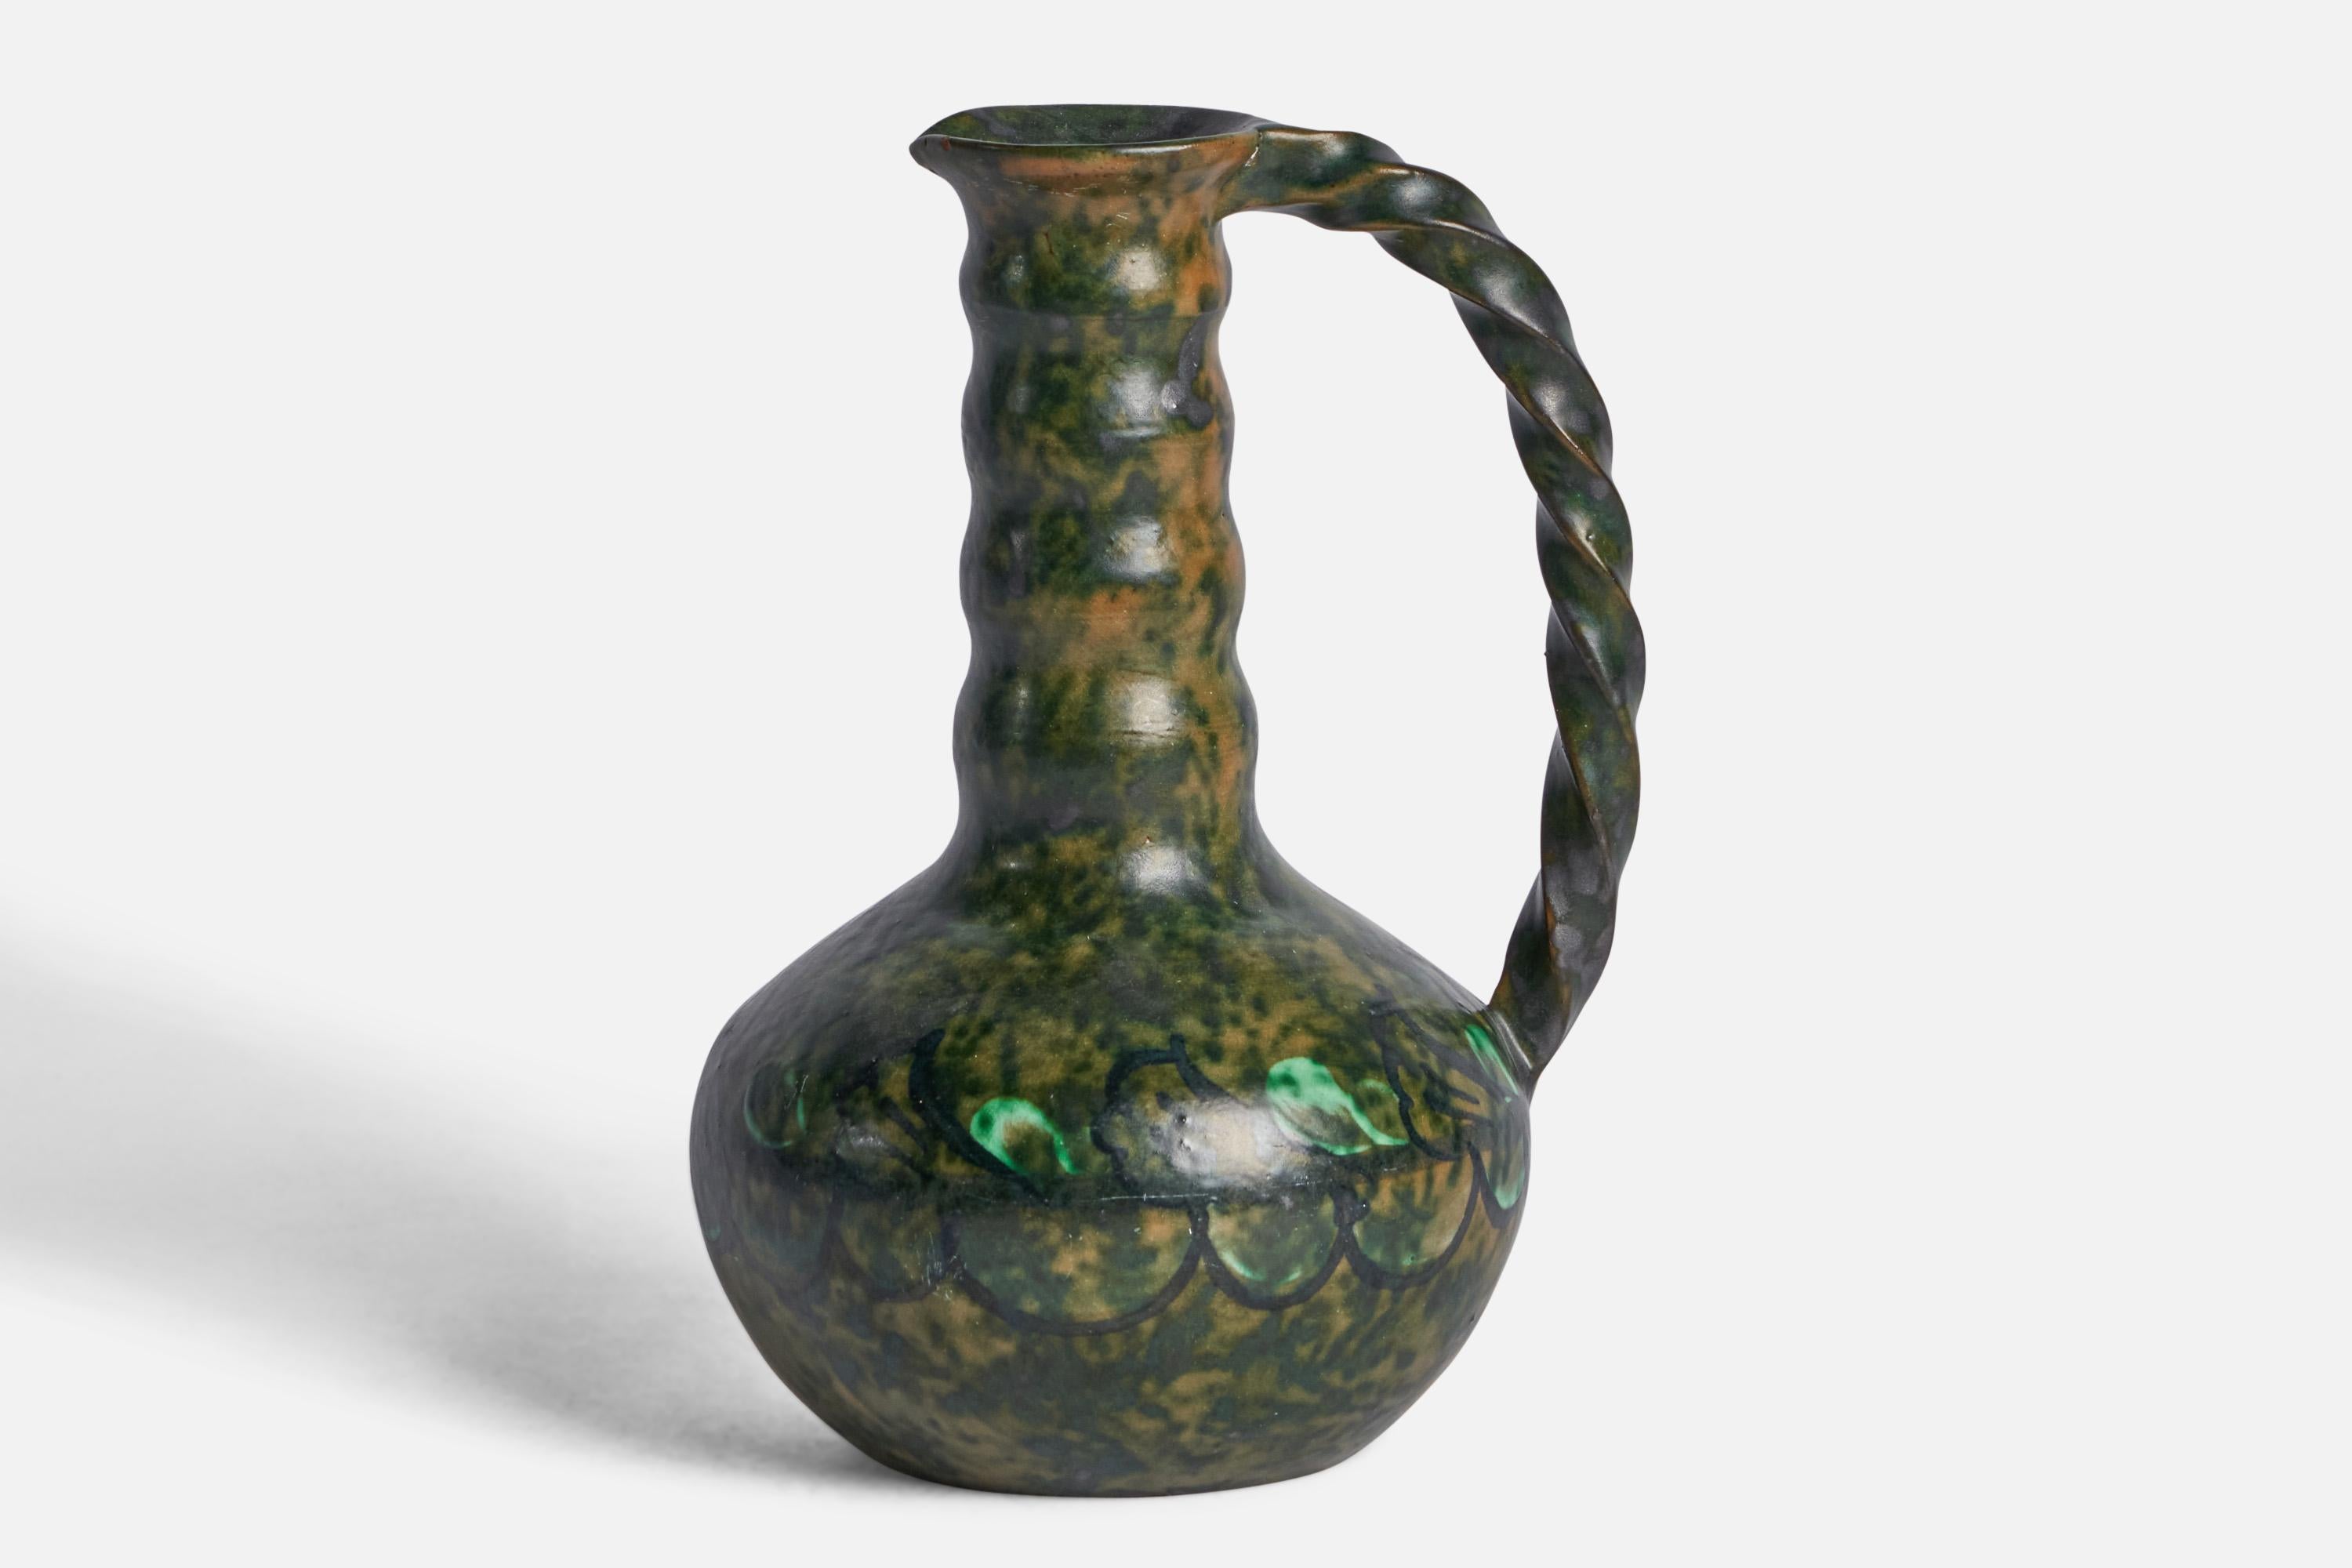 A green-glazed earthenware pitcher designed by Erik Mornils and produced by Nittsjö, Sweden, c. 1930s.